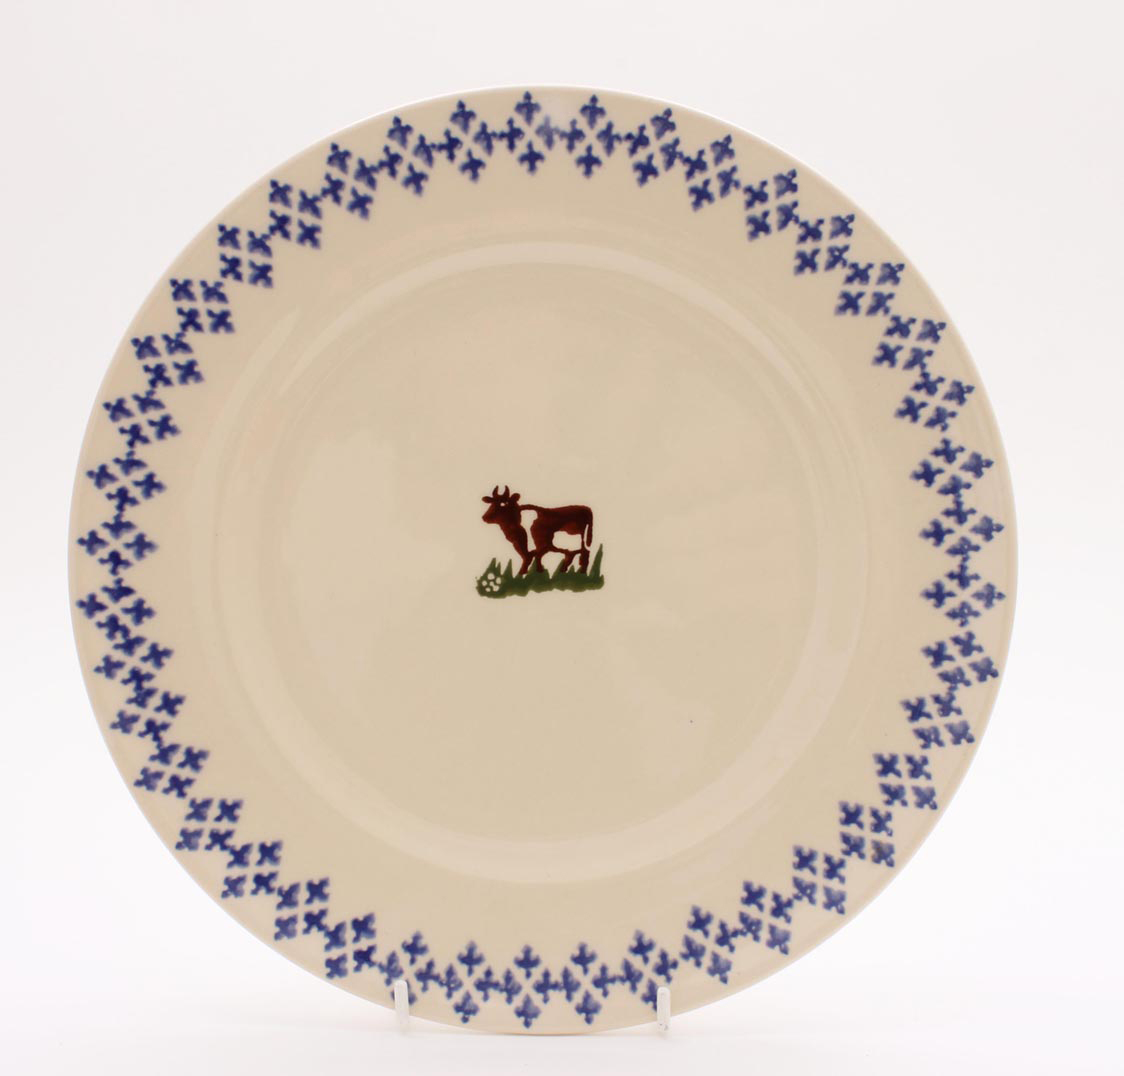 Brixton Cows Dinner Plate 25cm Gift